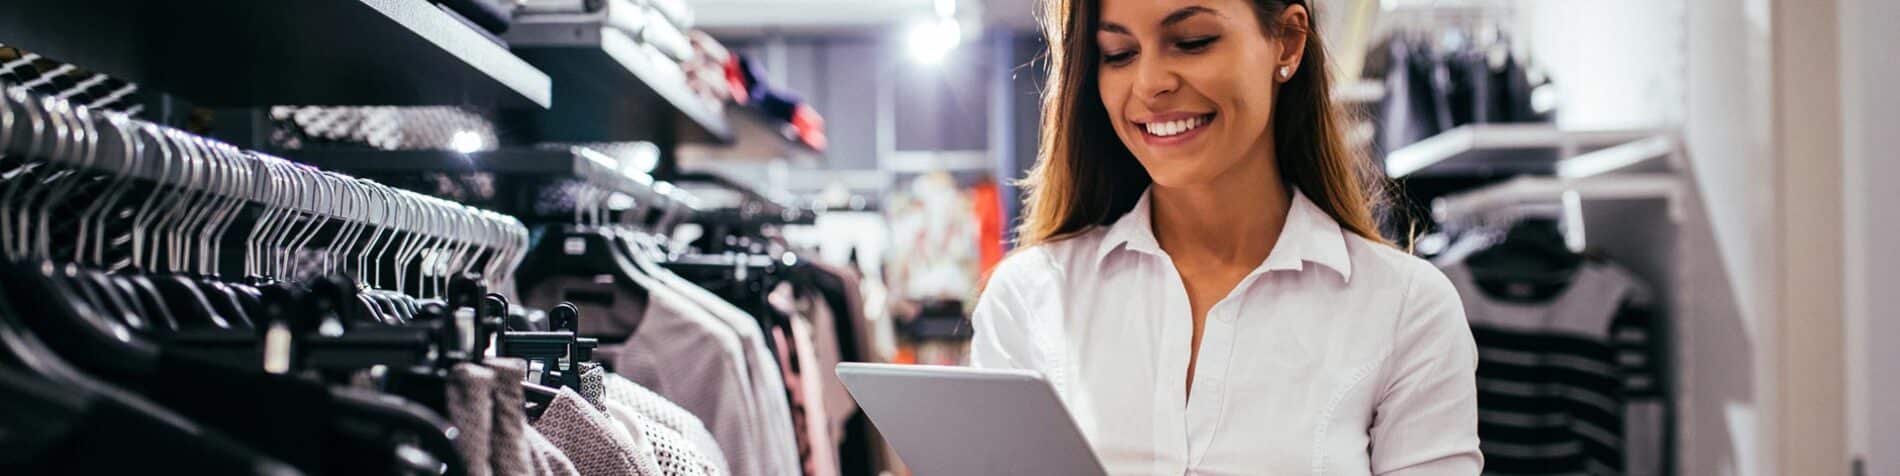 How Conscious Consumers Are Leading the Way to the Democratization of Retail